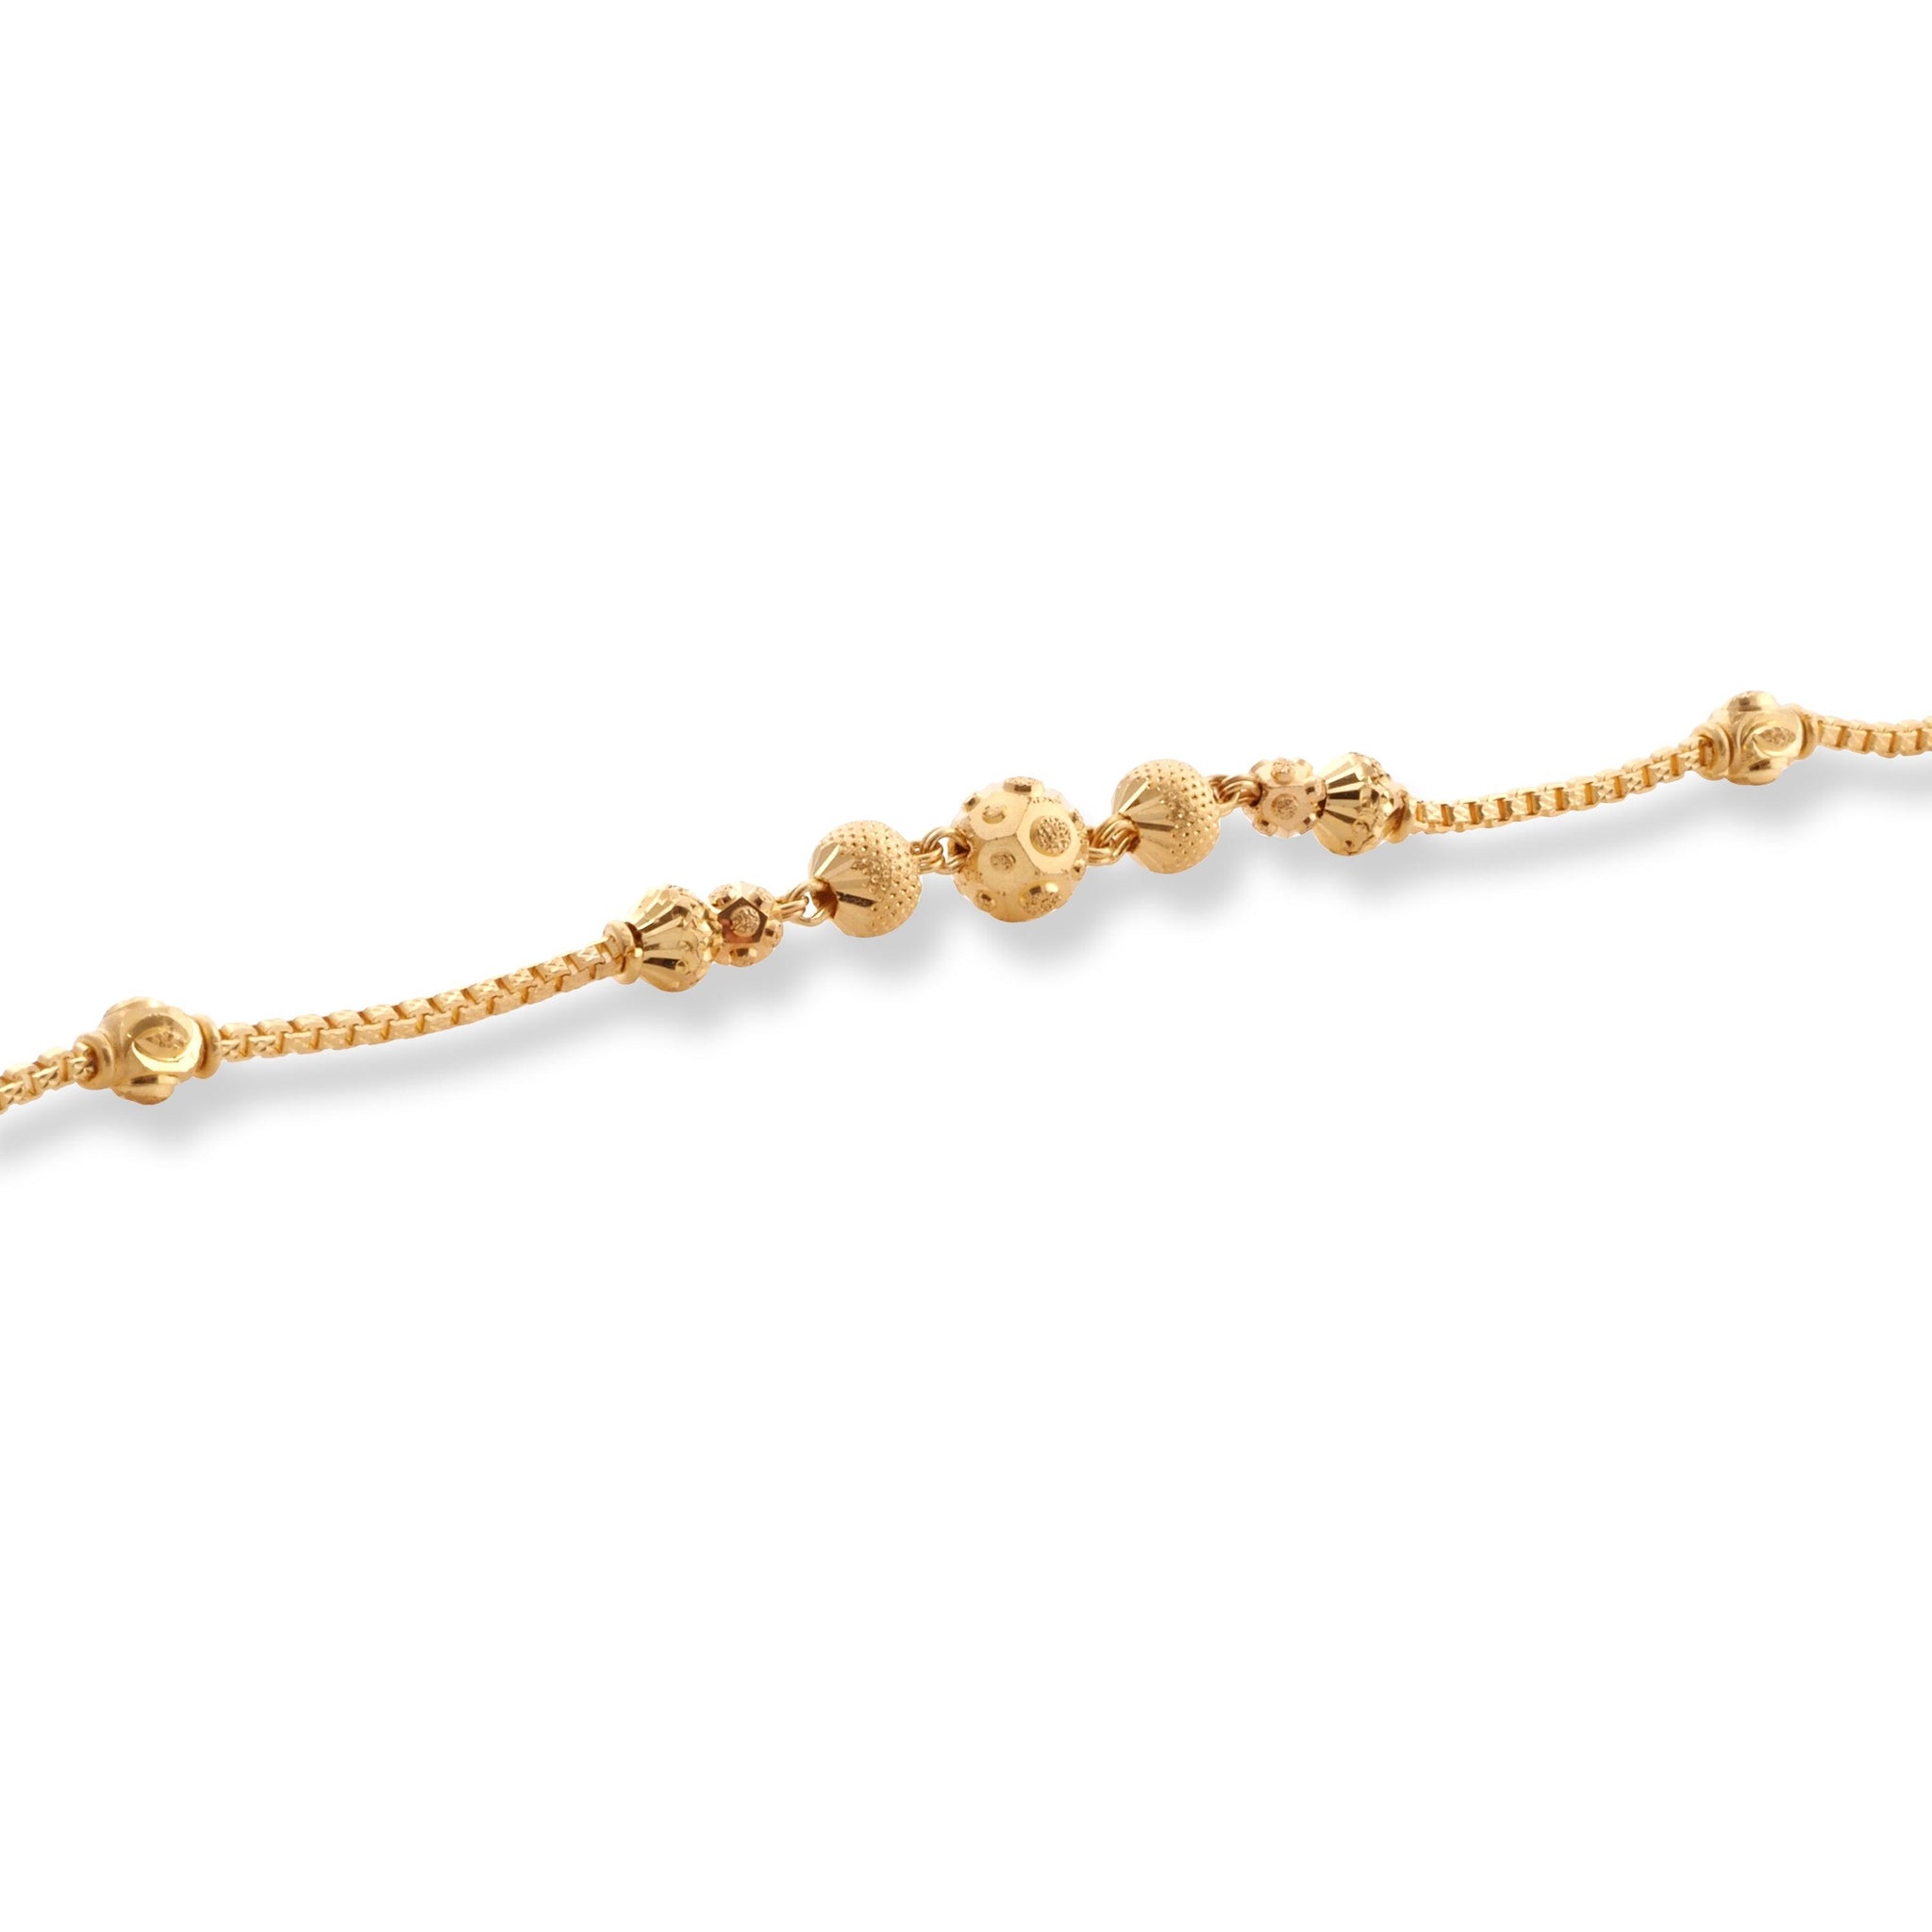 22ct Gold Bracelet with Diamond Cut Beads and Hook Clasp LBR-8512